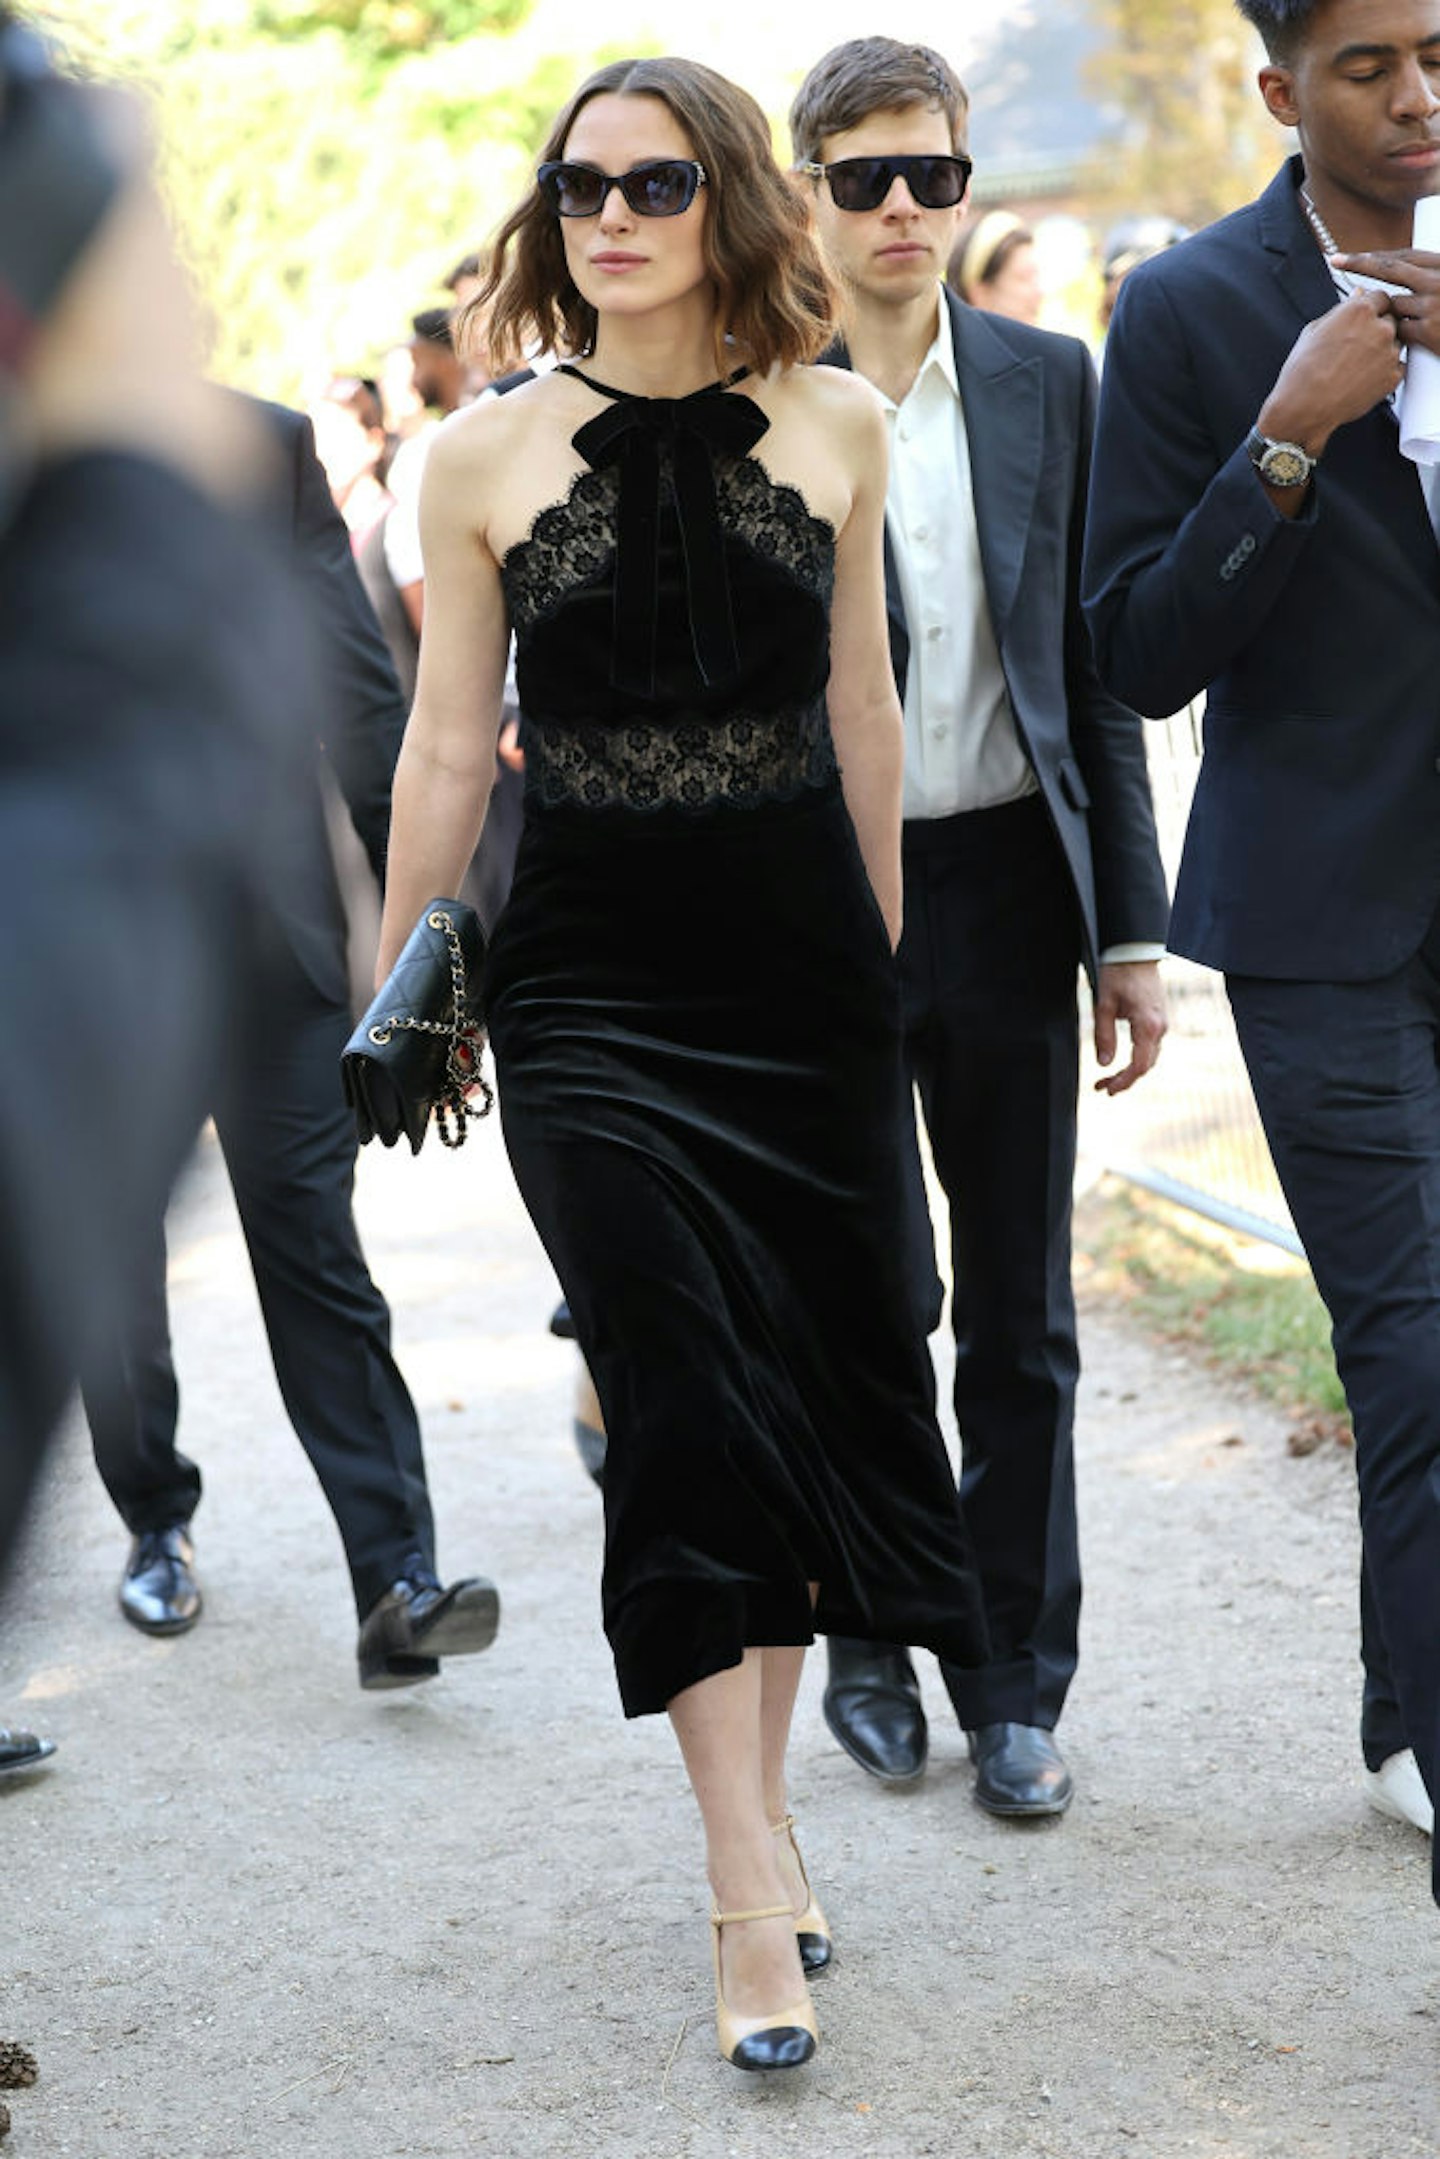 Keira Knightley Wore A Summer Black Dress At Chanel